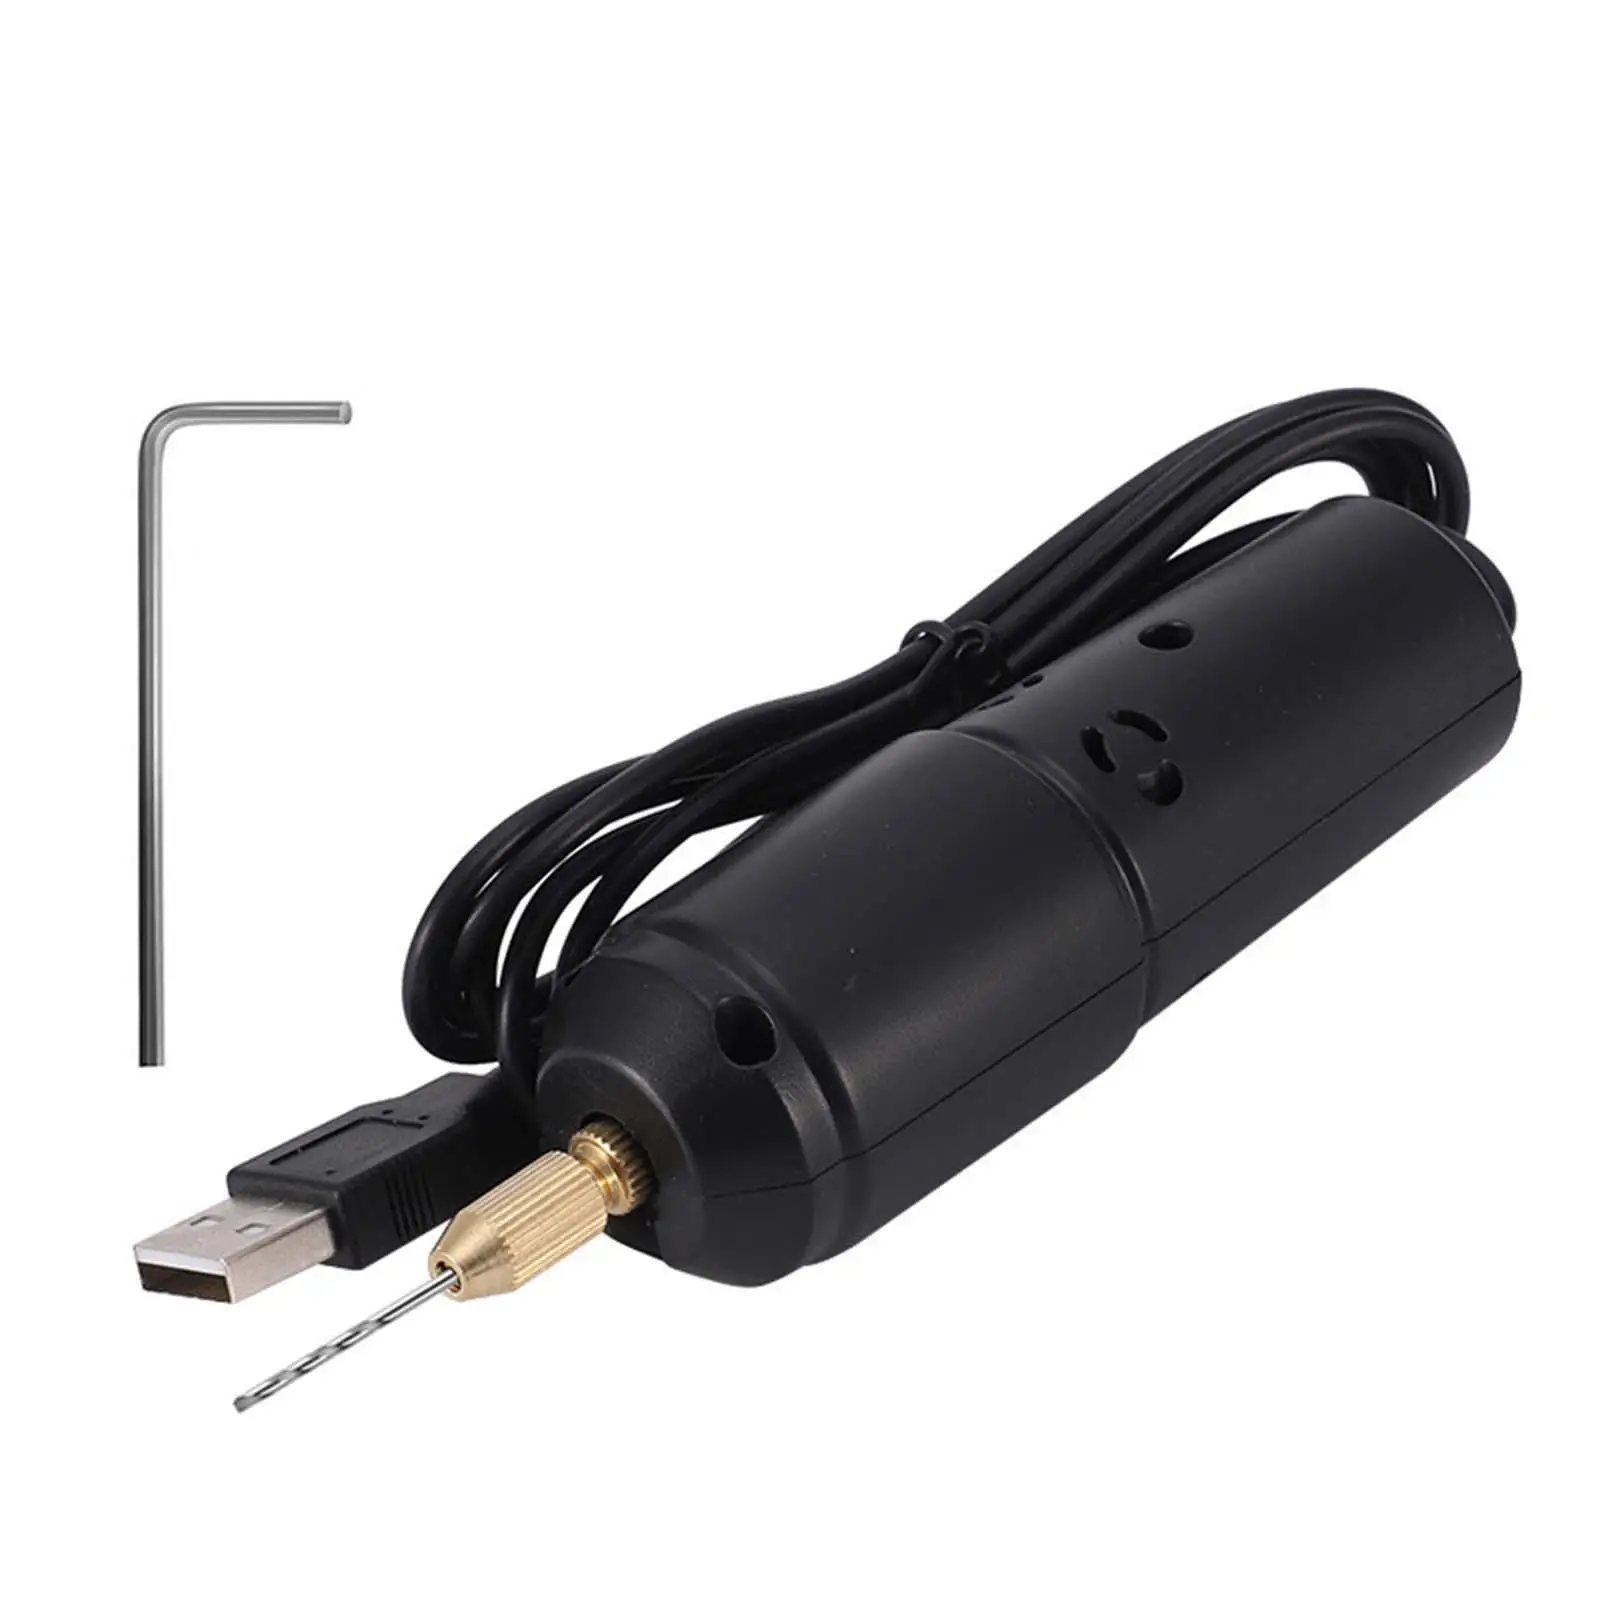 Handheld Mini Electric Drill with Drill Bits Woodworking Tools Engraver USB Drill for Epoxy Resin Keychains Making